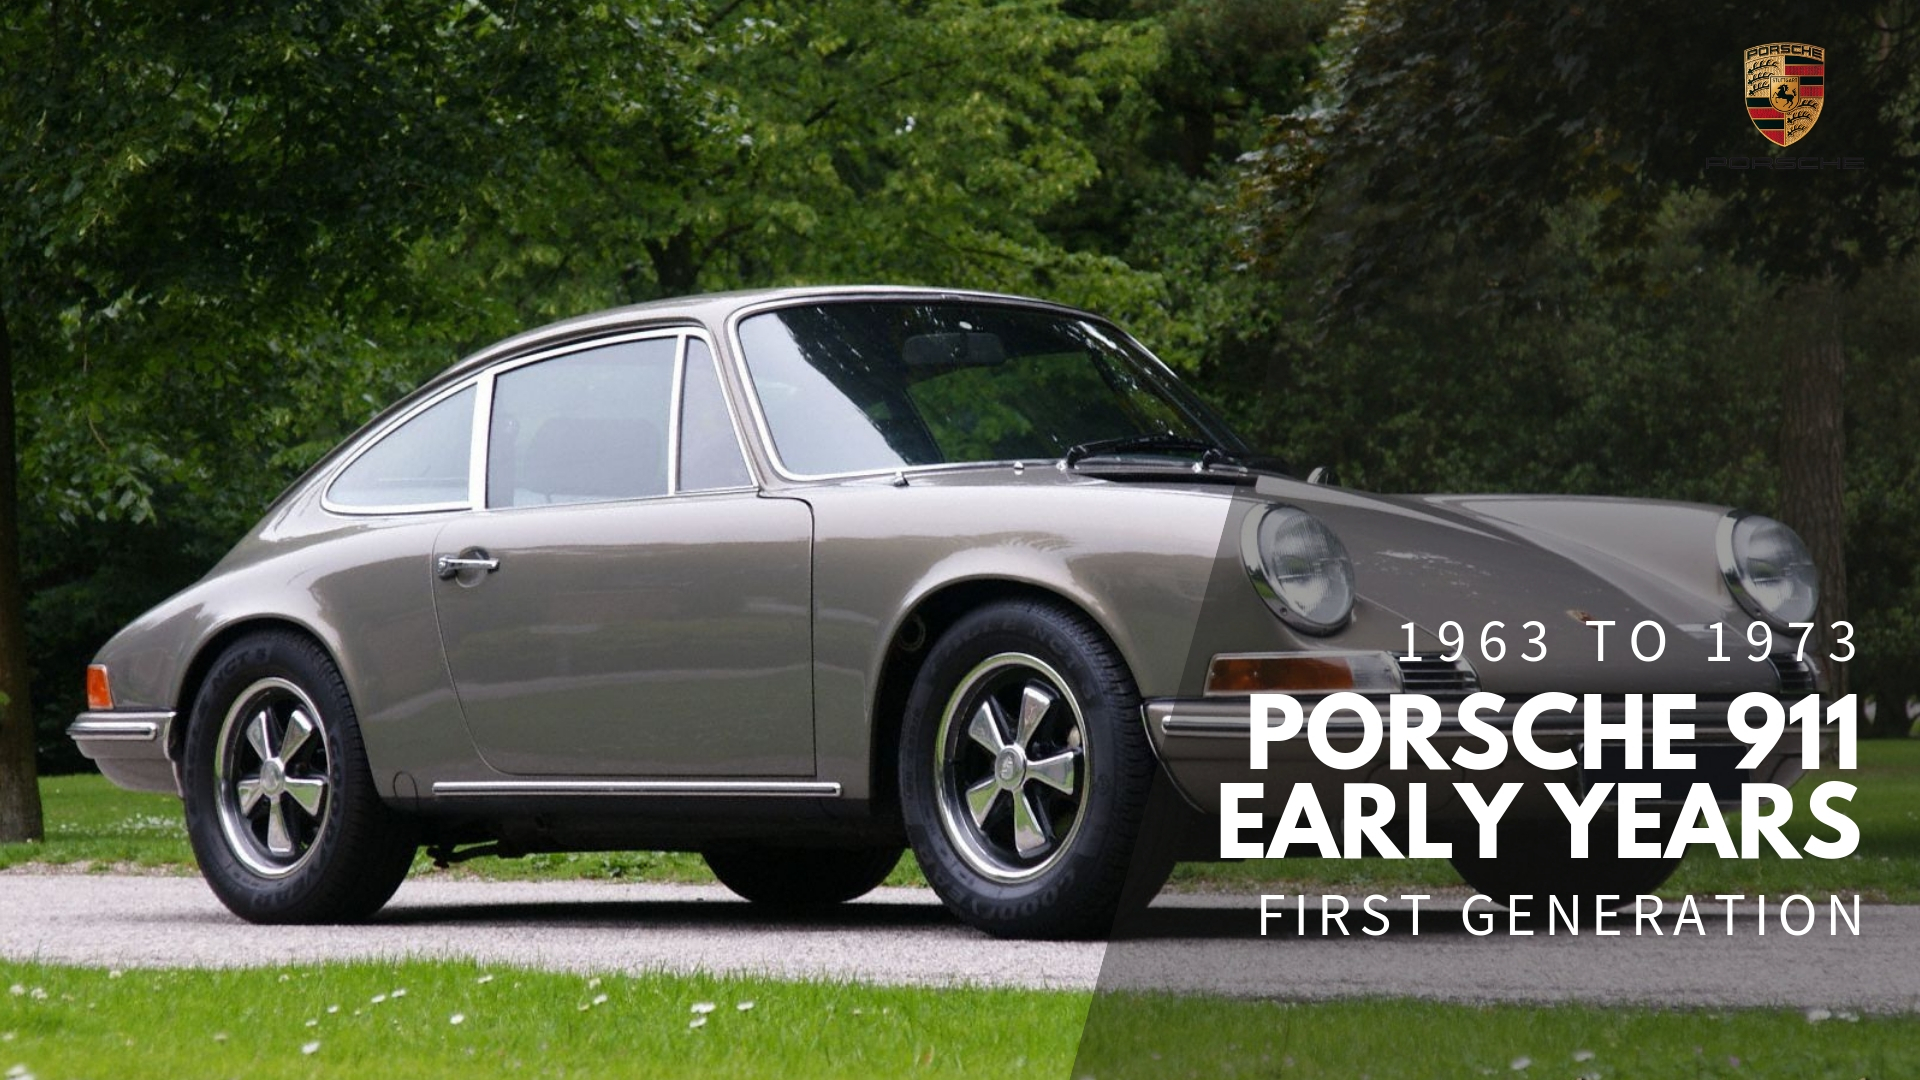 Porsche 911 - The Early Years